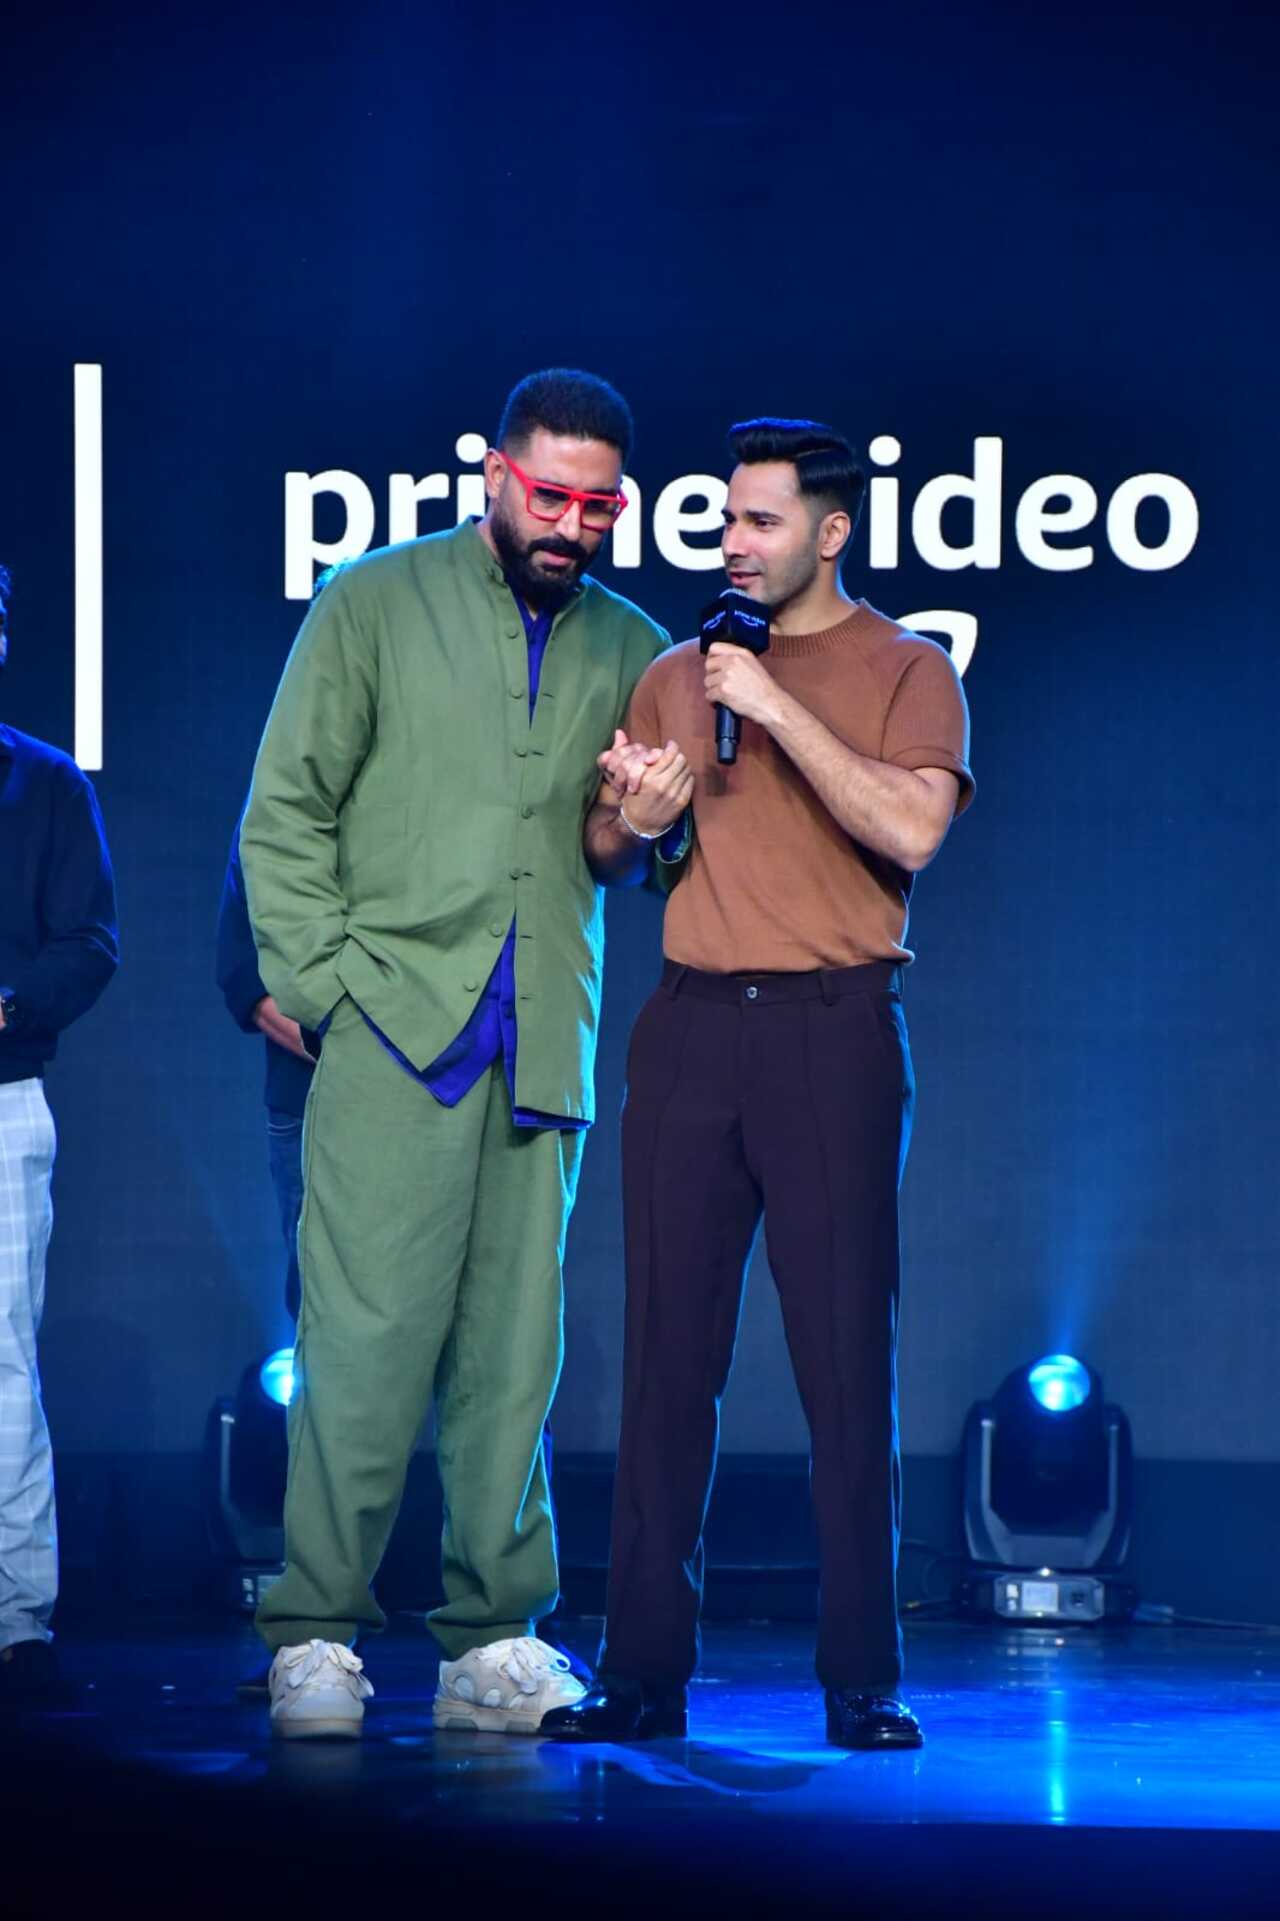 Abhishek Bachchan and Varun Dhawan had a light-hearted banter on the stage at the Prime Video event